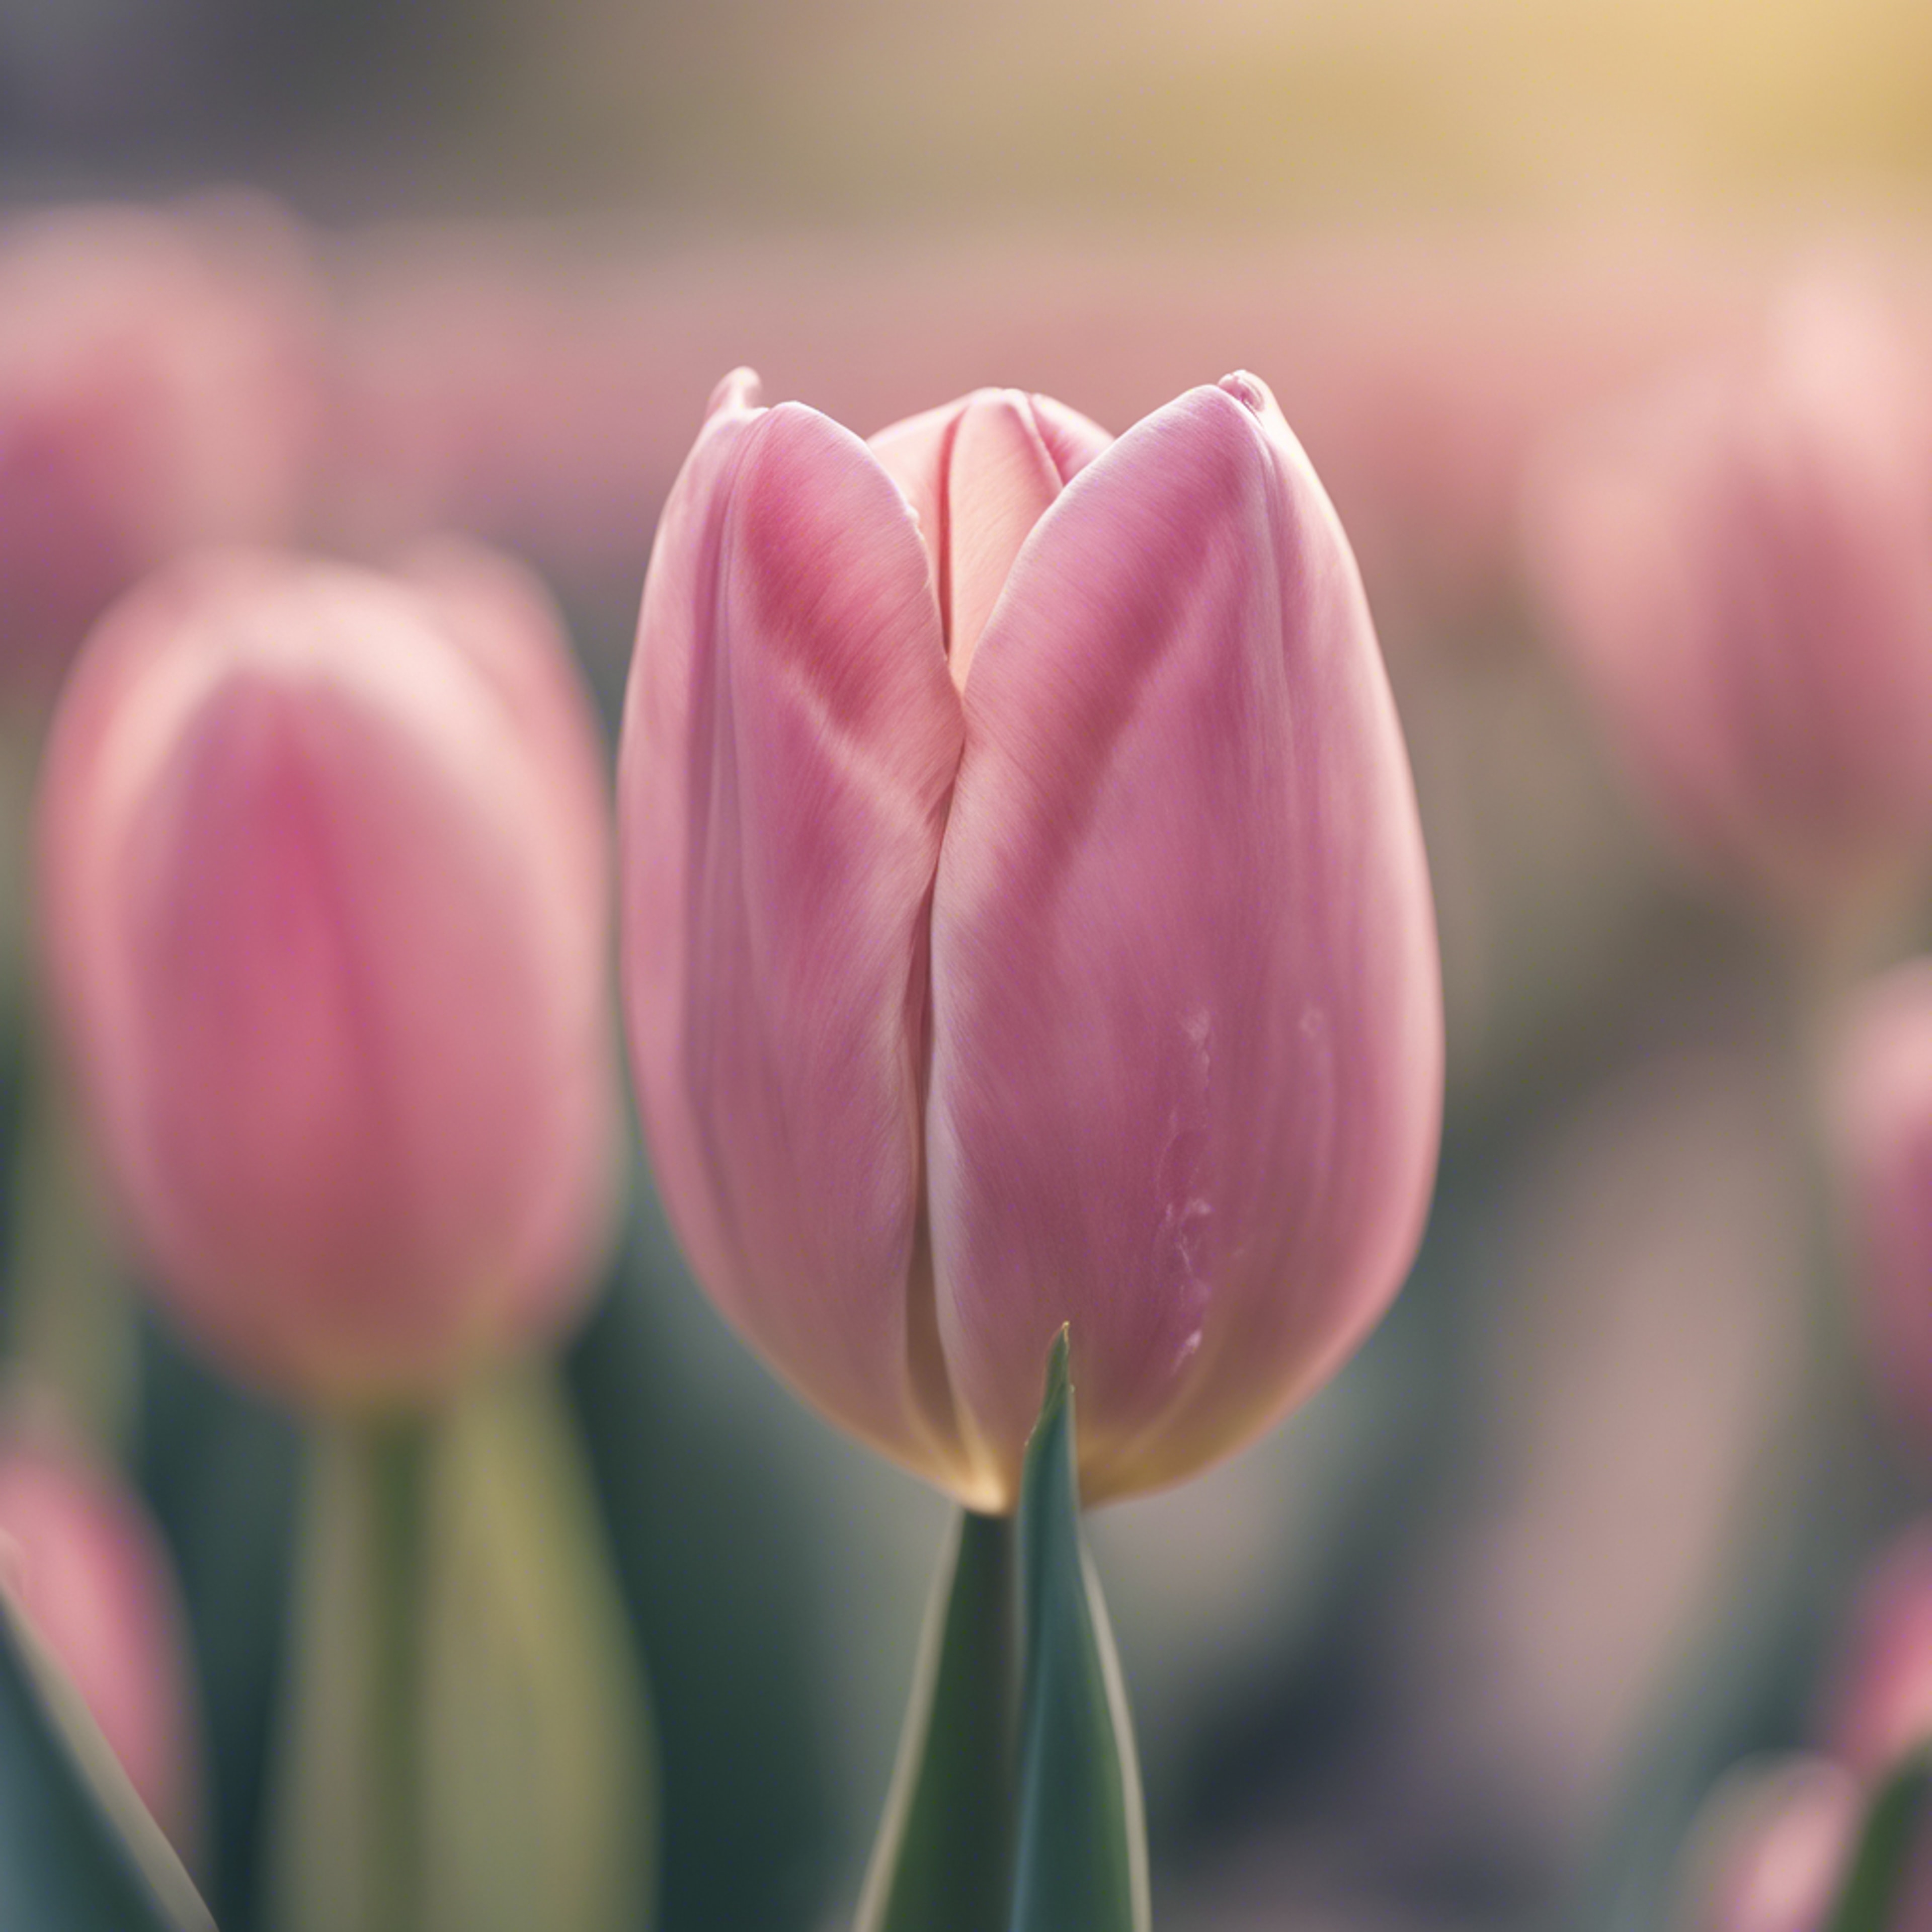 A close-up of a lone pink tulip against a soft and blurry pastel background ورق الجدران[4132f8cb968043e28bd5]